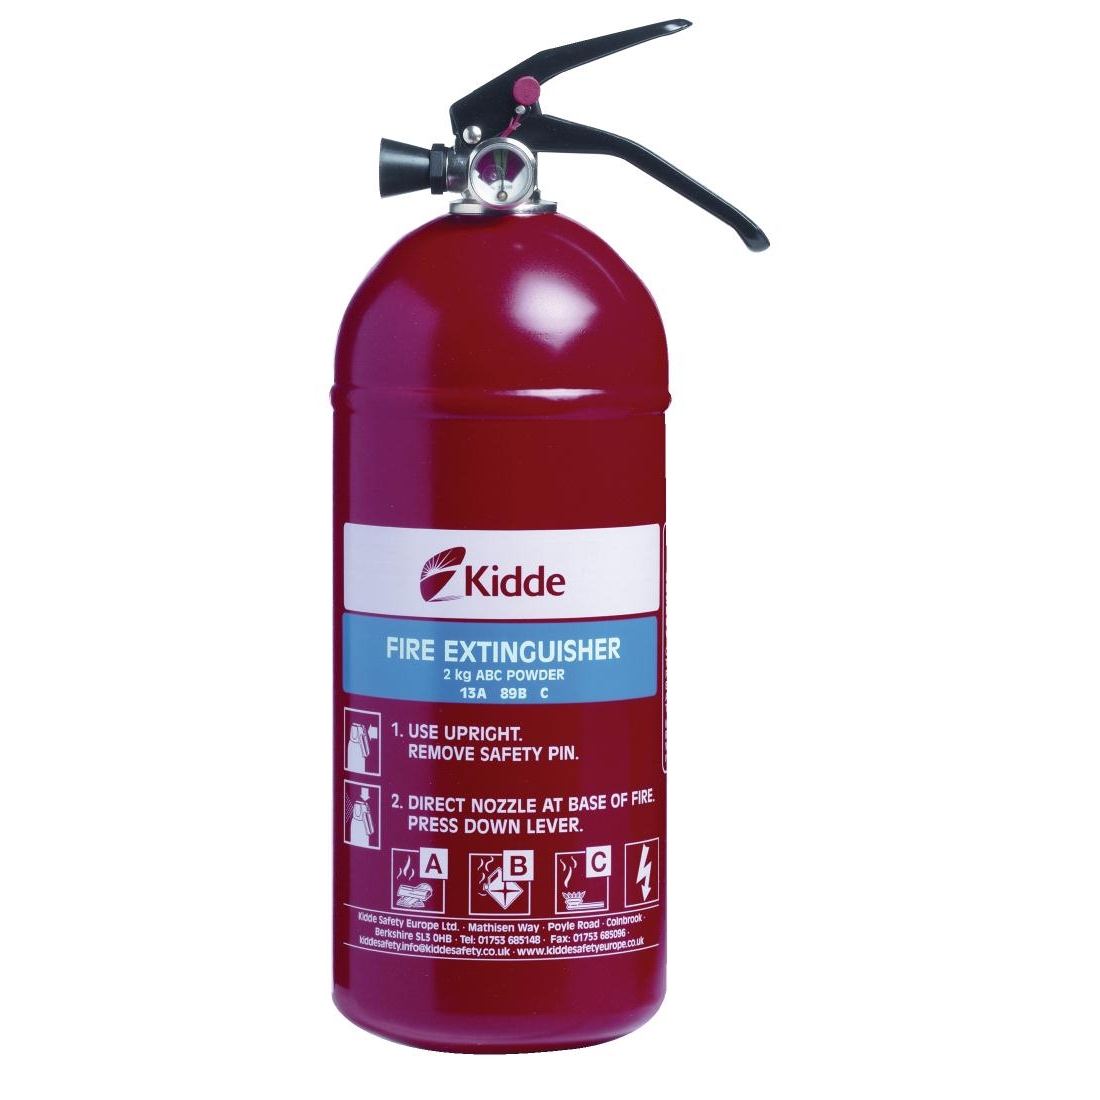 Fire Extinguisher - Multi Purpose (A,B, C and electrical fires)